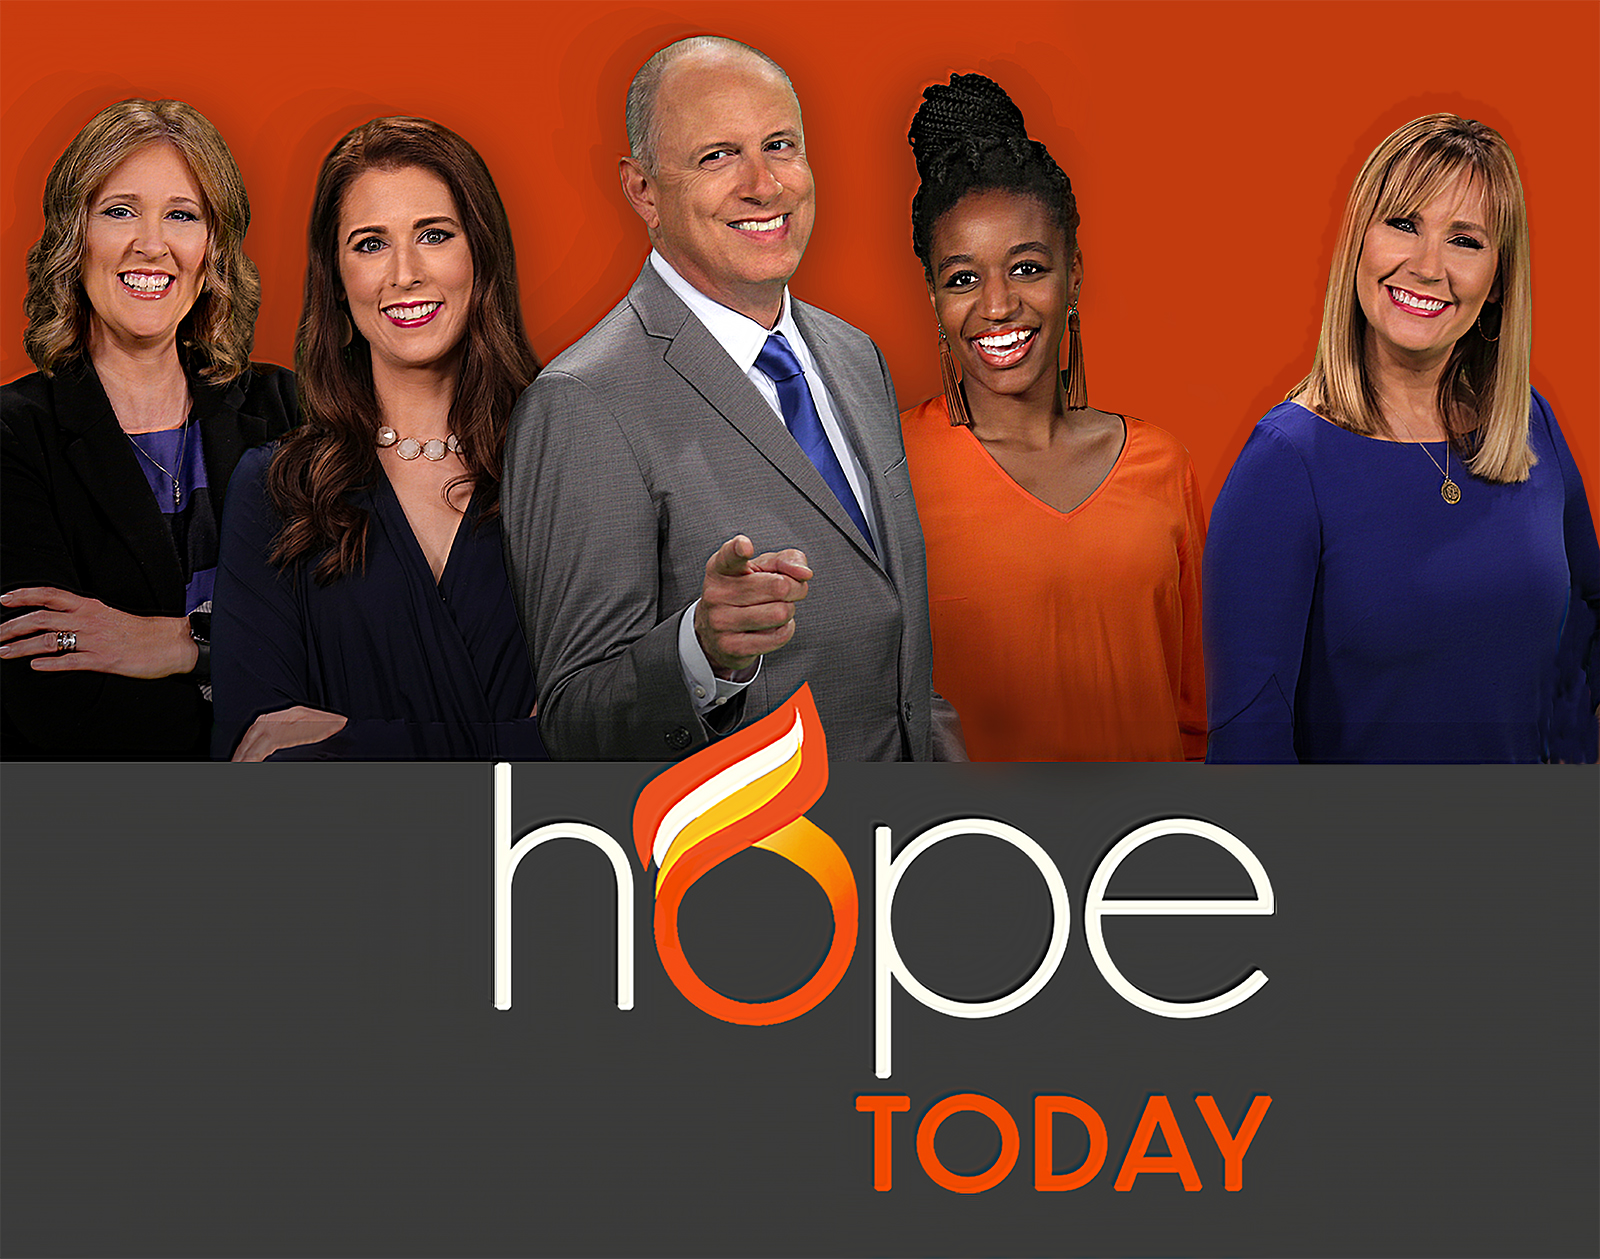 HOPE TODAY POSTER